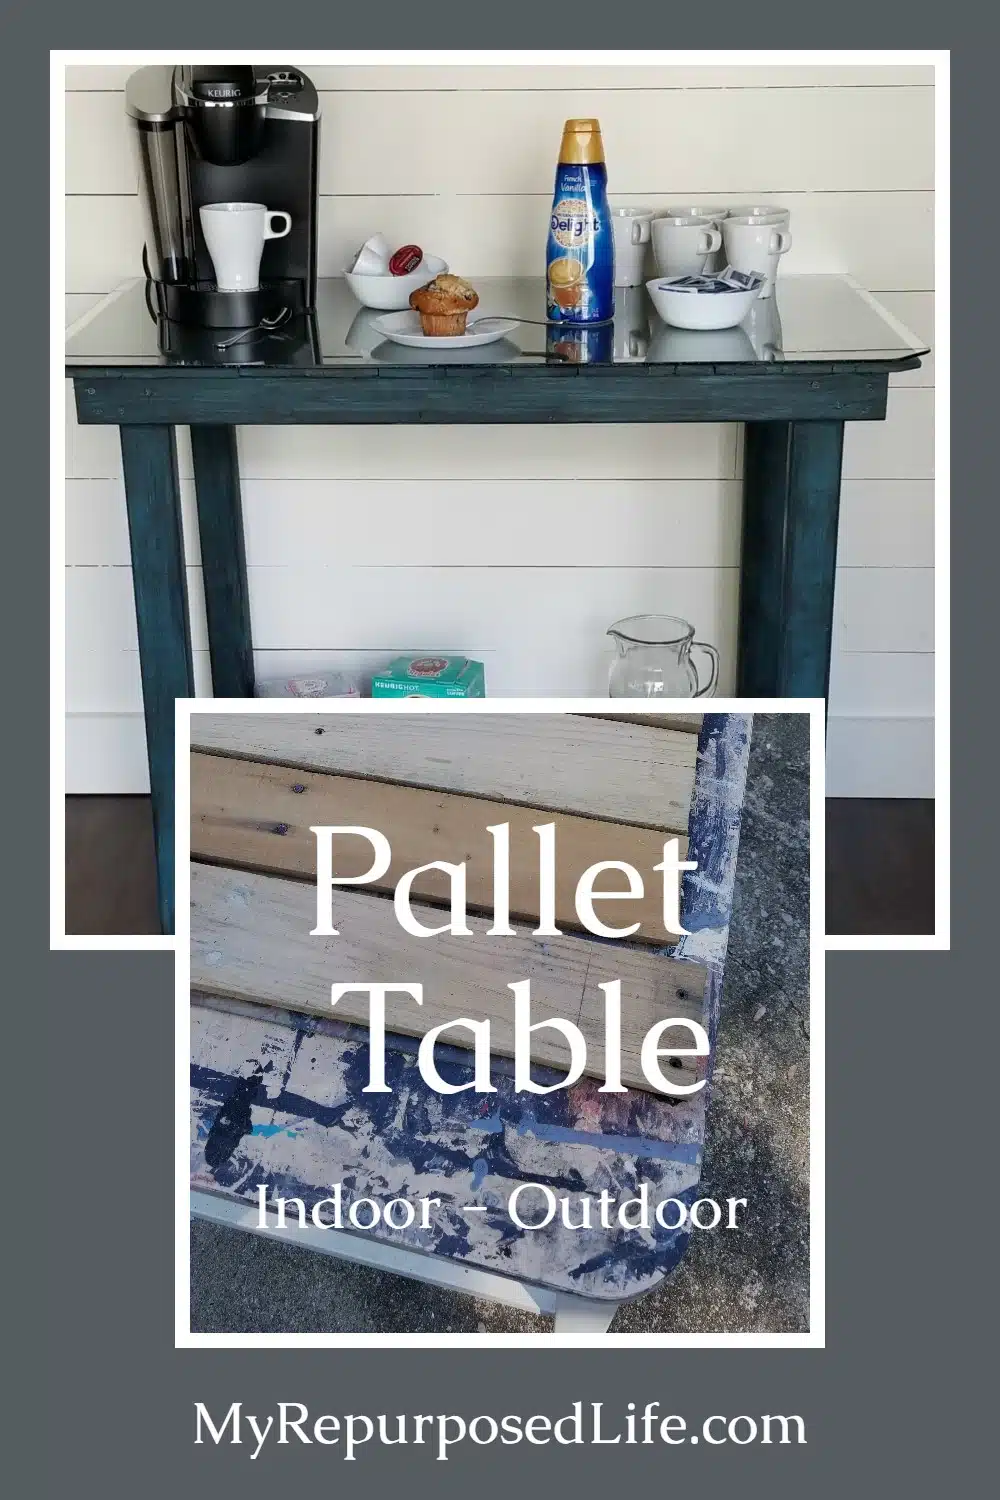 How to make a coffee bar pallet table. Tips for constructing a handy table/bar out of pallet wood. #MyRepurposedLife #repurposed #pallet #table #coffee #bar via @repurposedlife